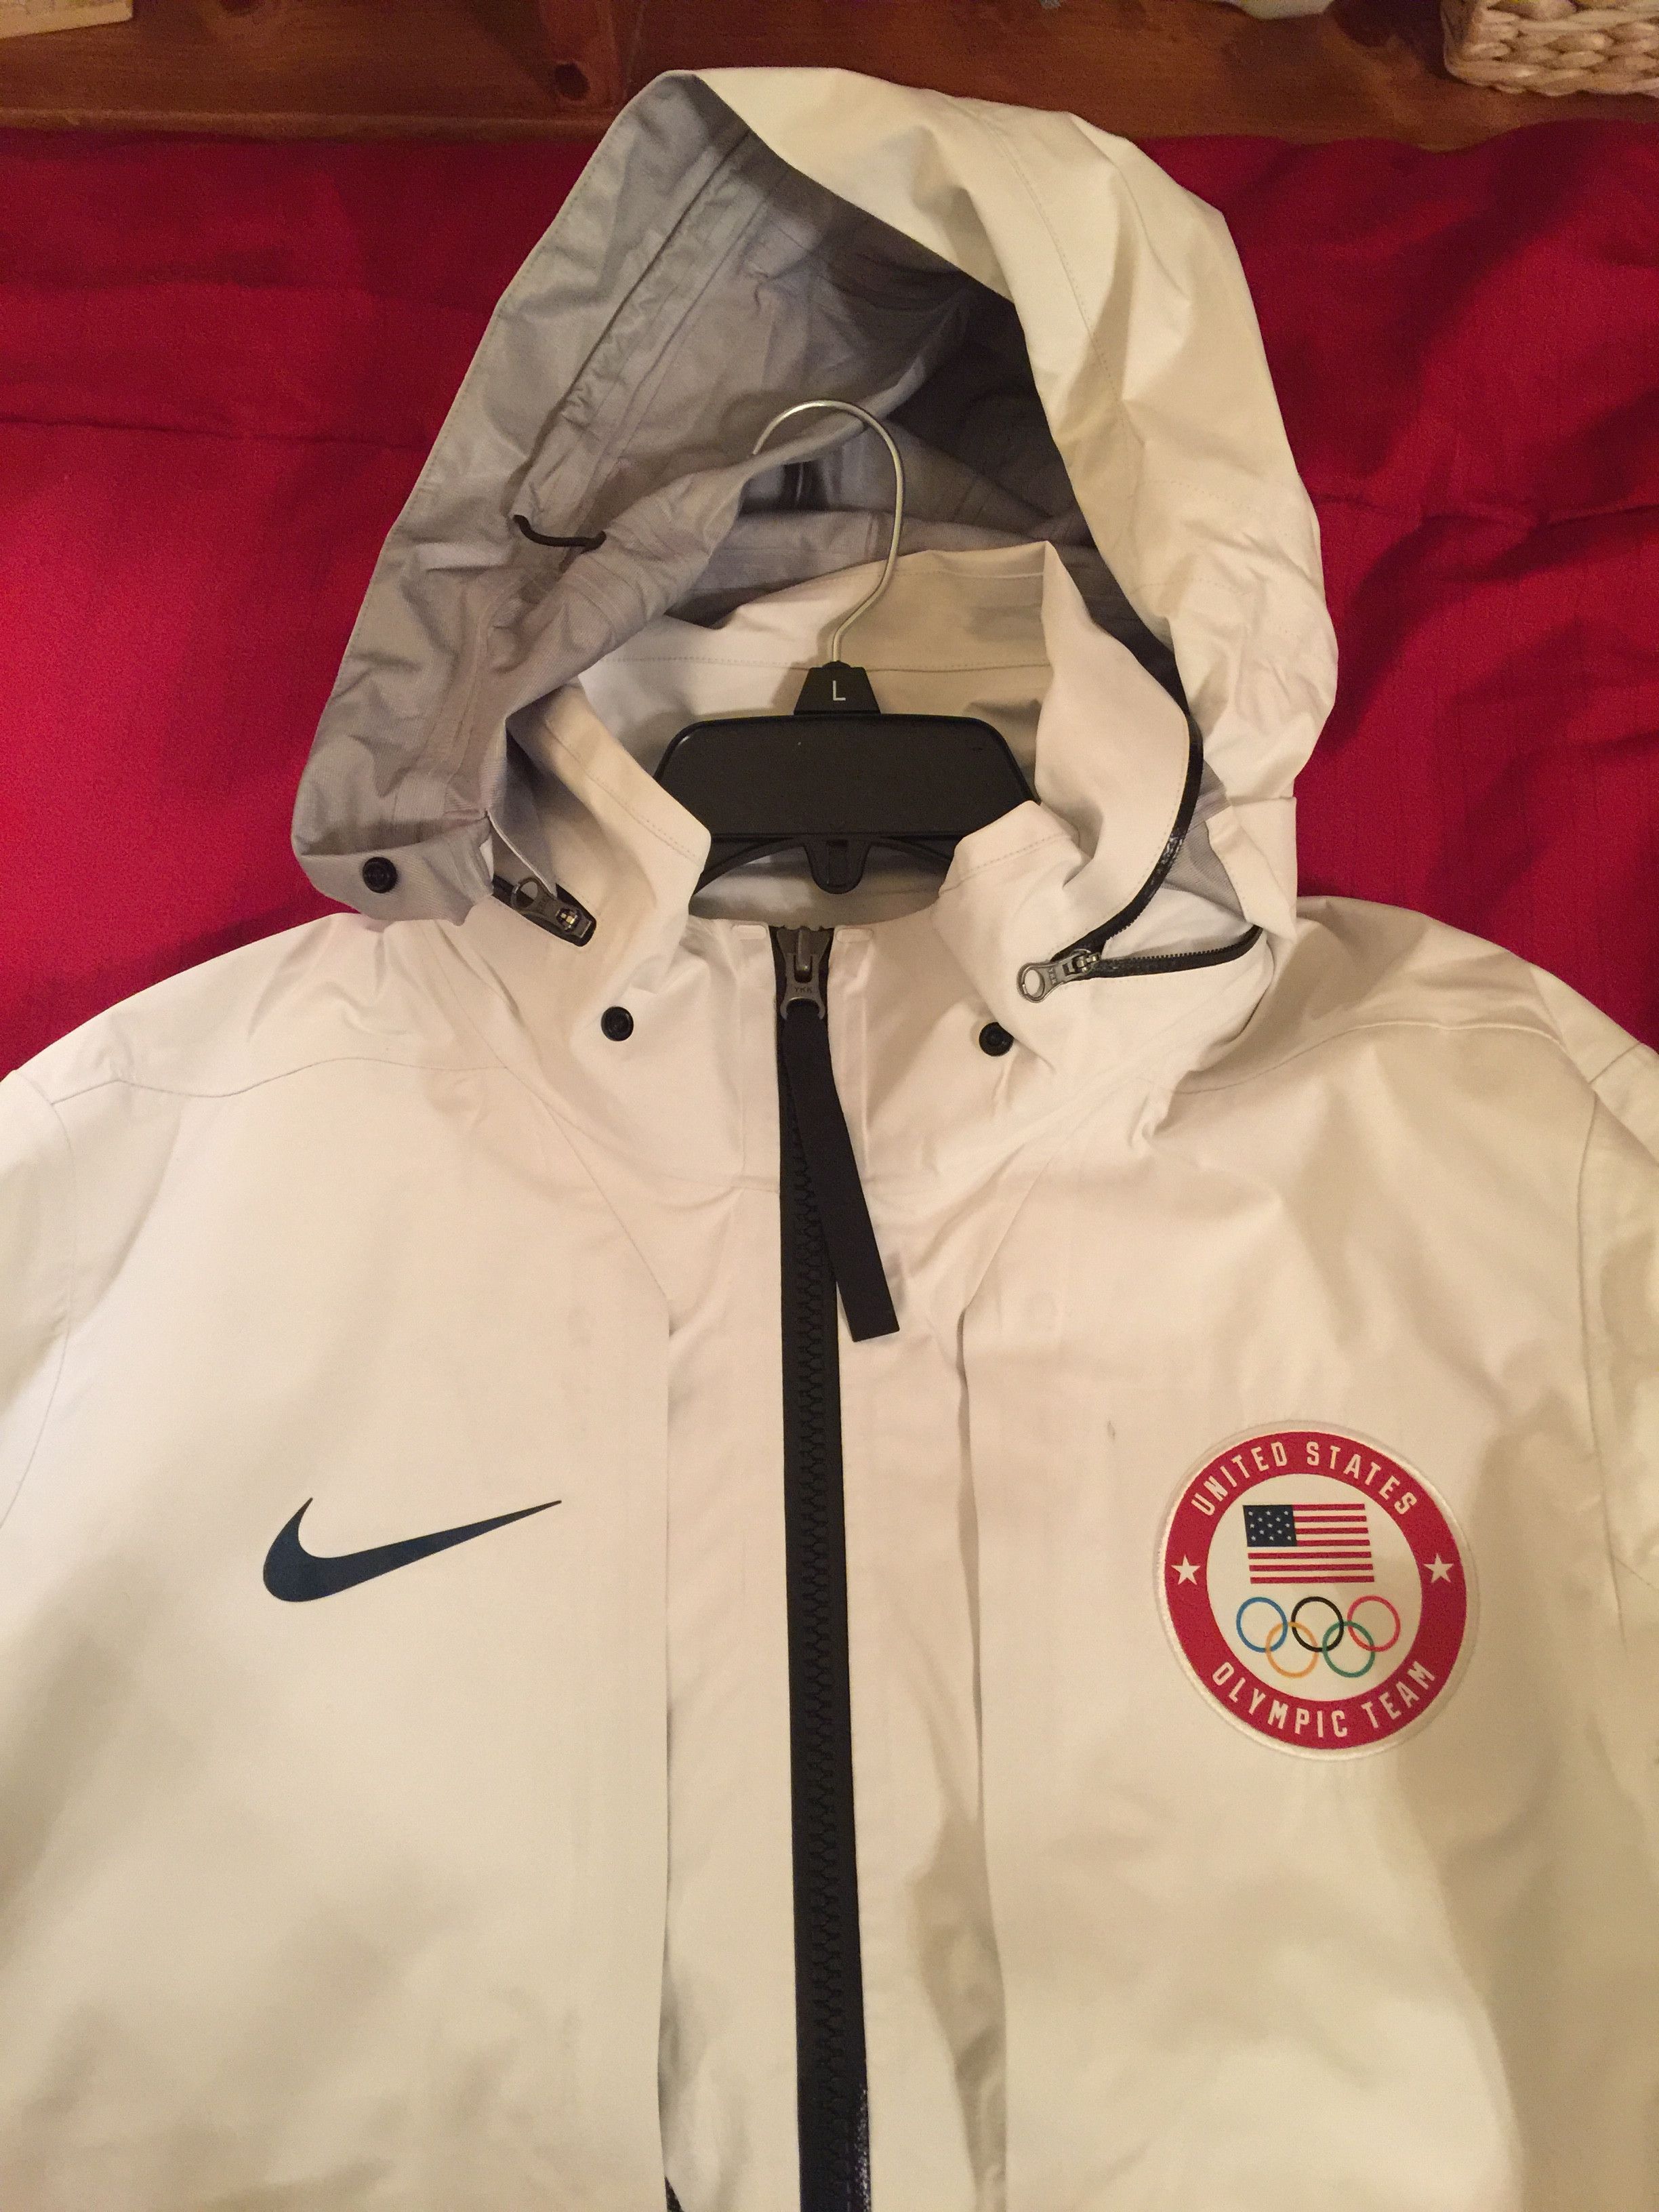 Nike Nike NikeLab Olympic Team USA Medal Stand White GoreTex Jacket Large New Size US L / EU 52-54 / 3 - 2 Preview